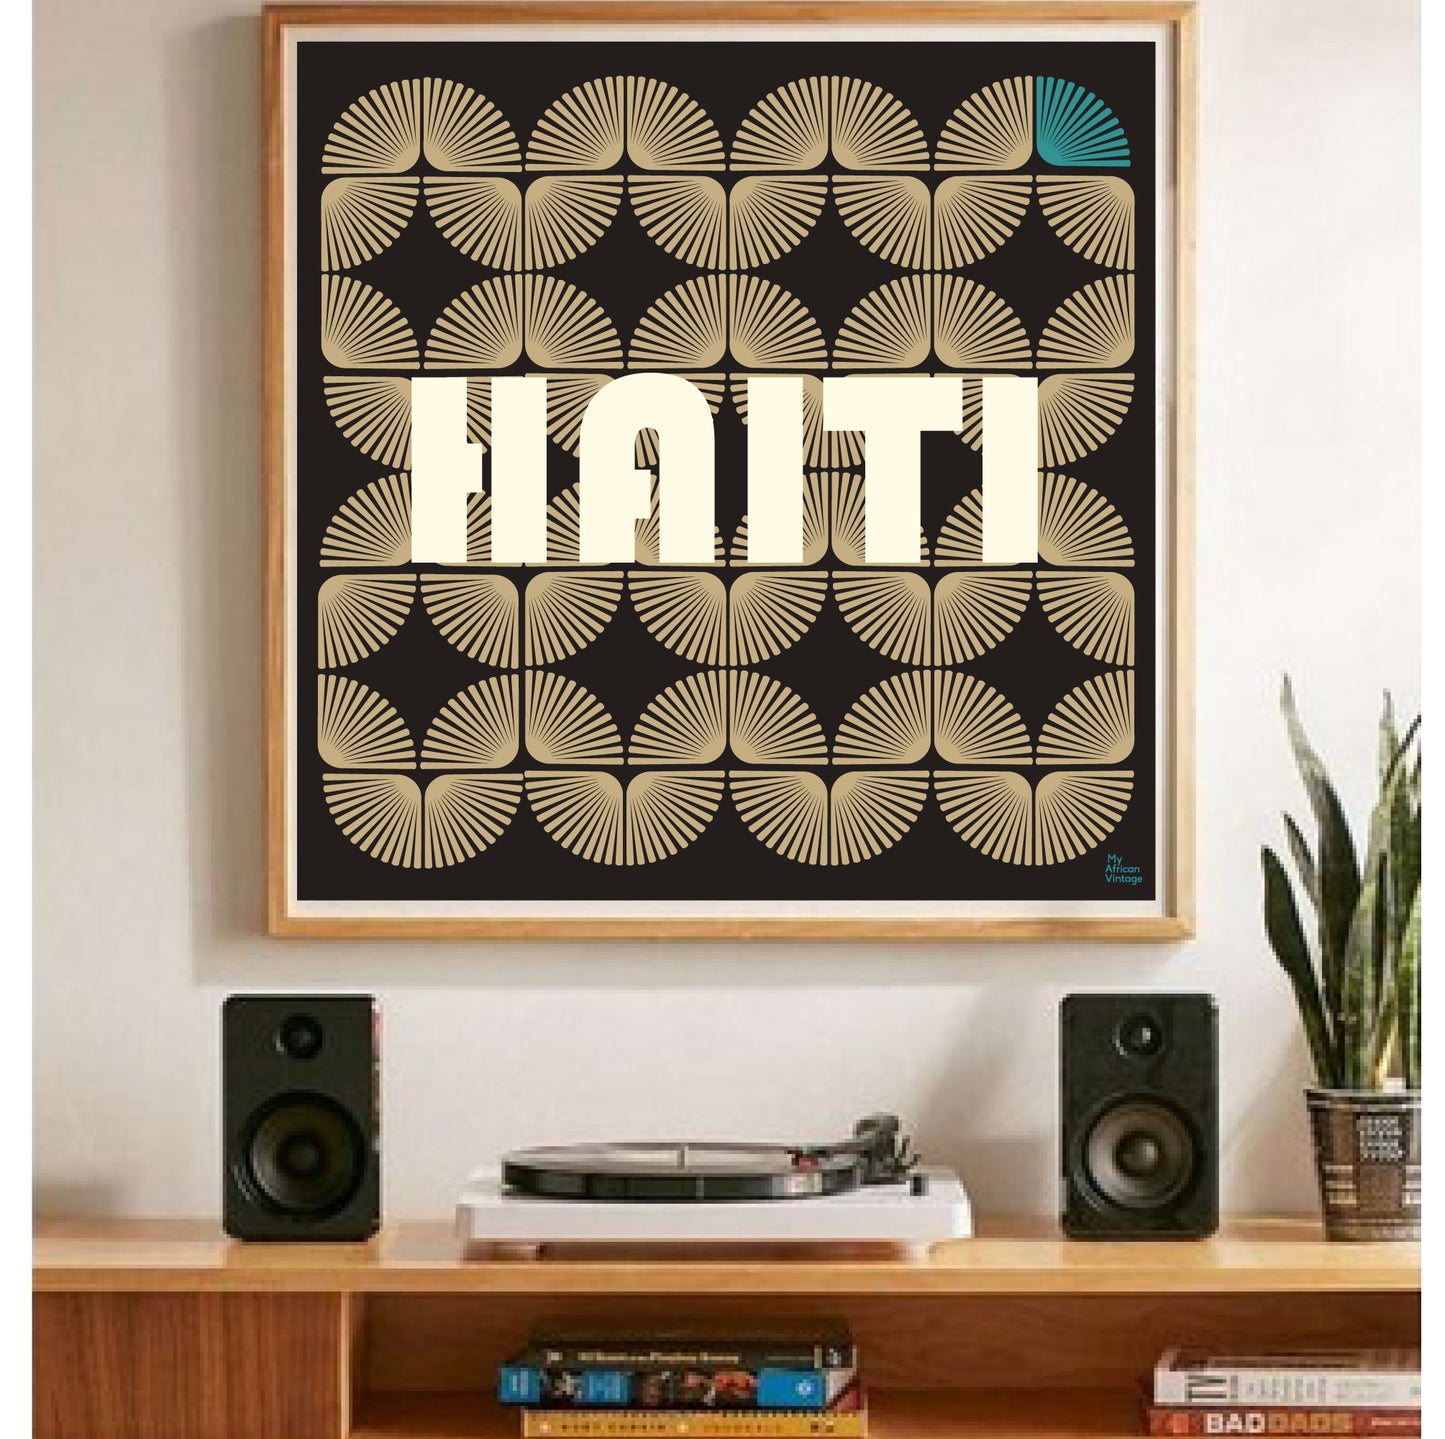 "Haiti" retro style poster - "My African Vintage" collection